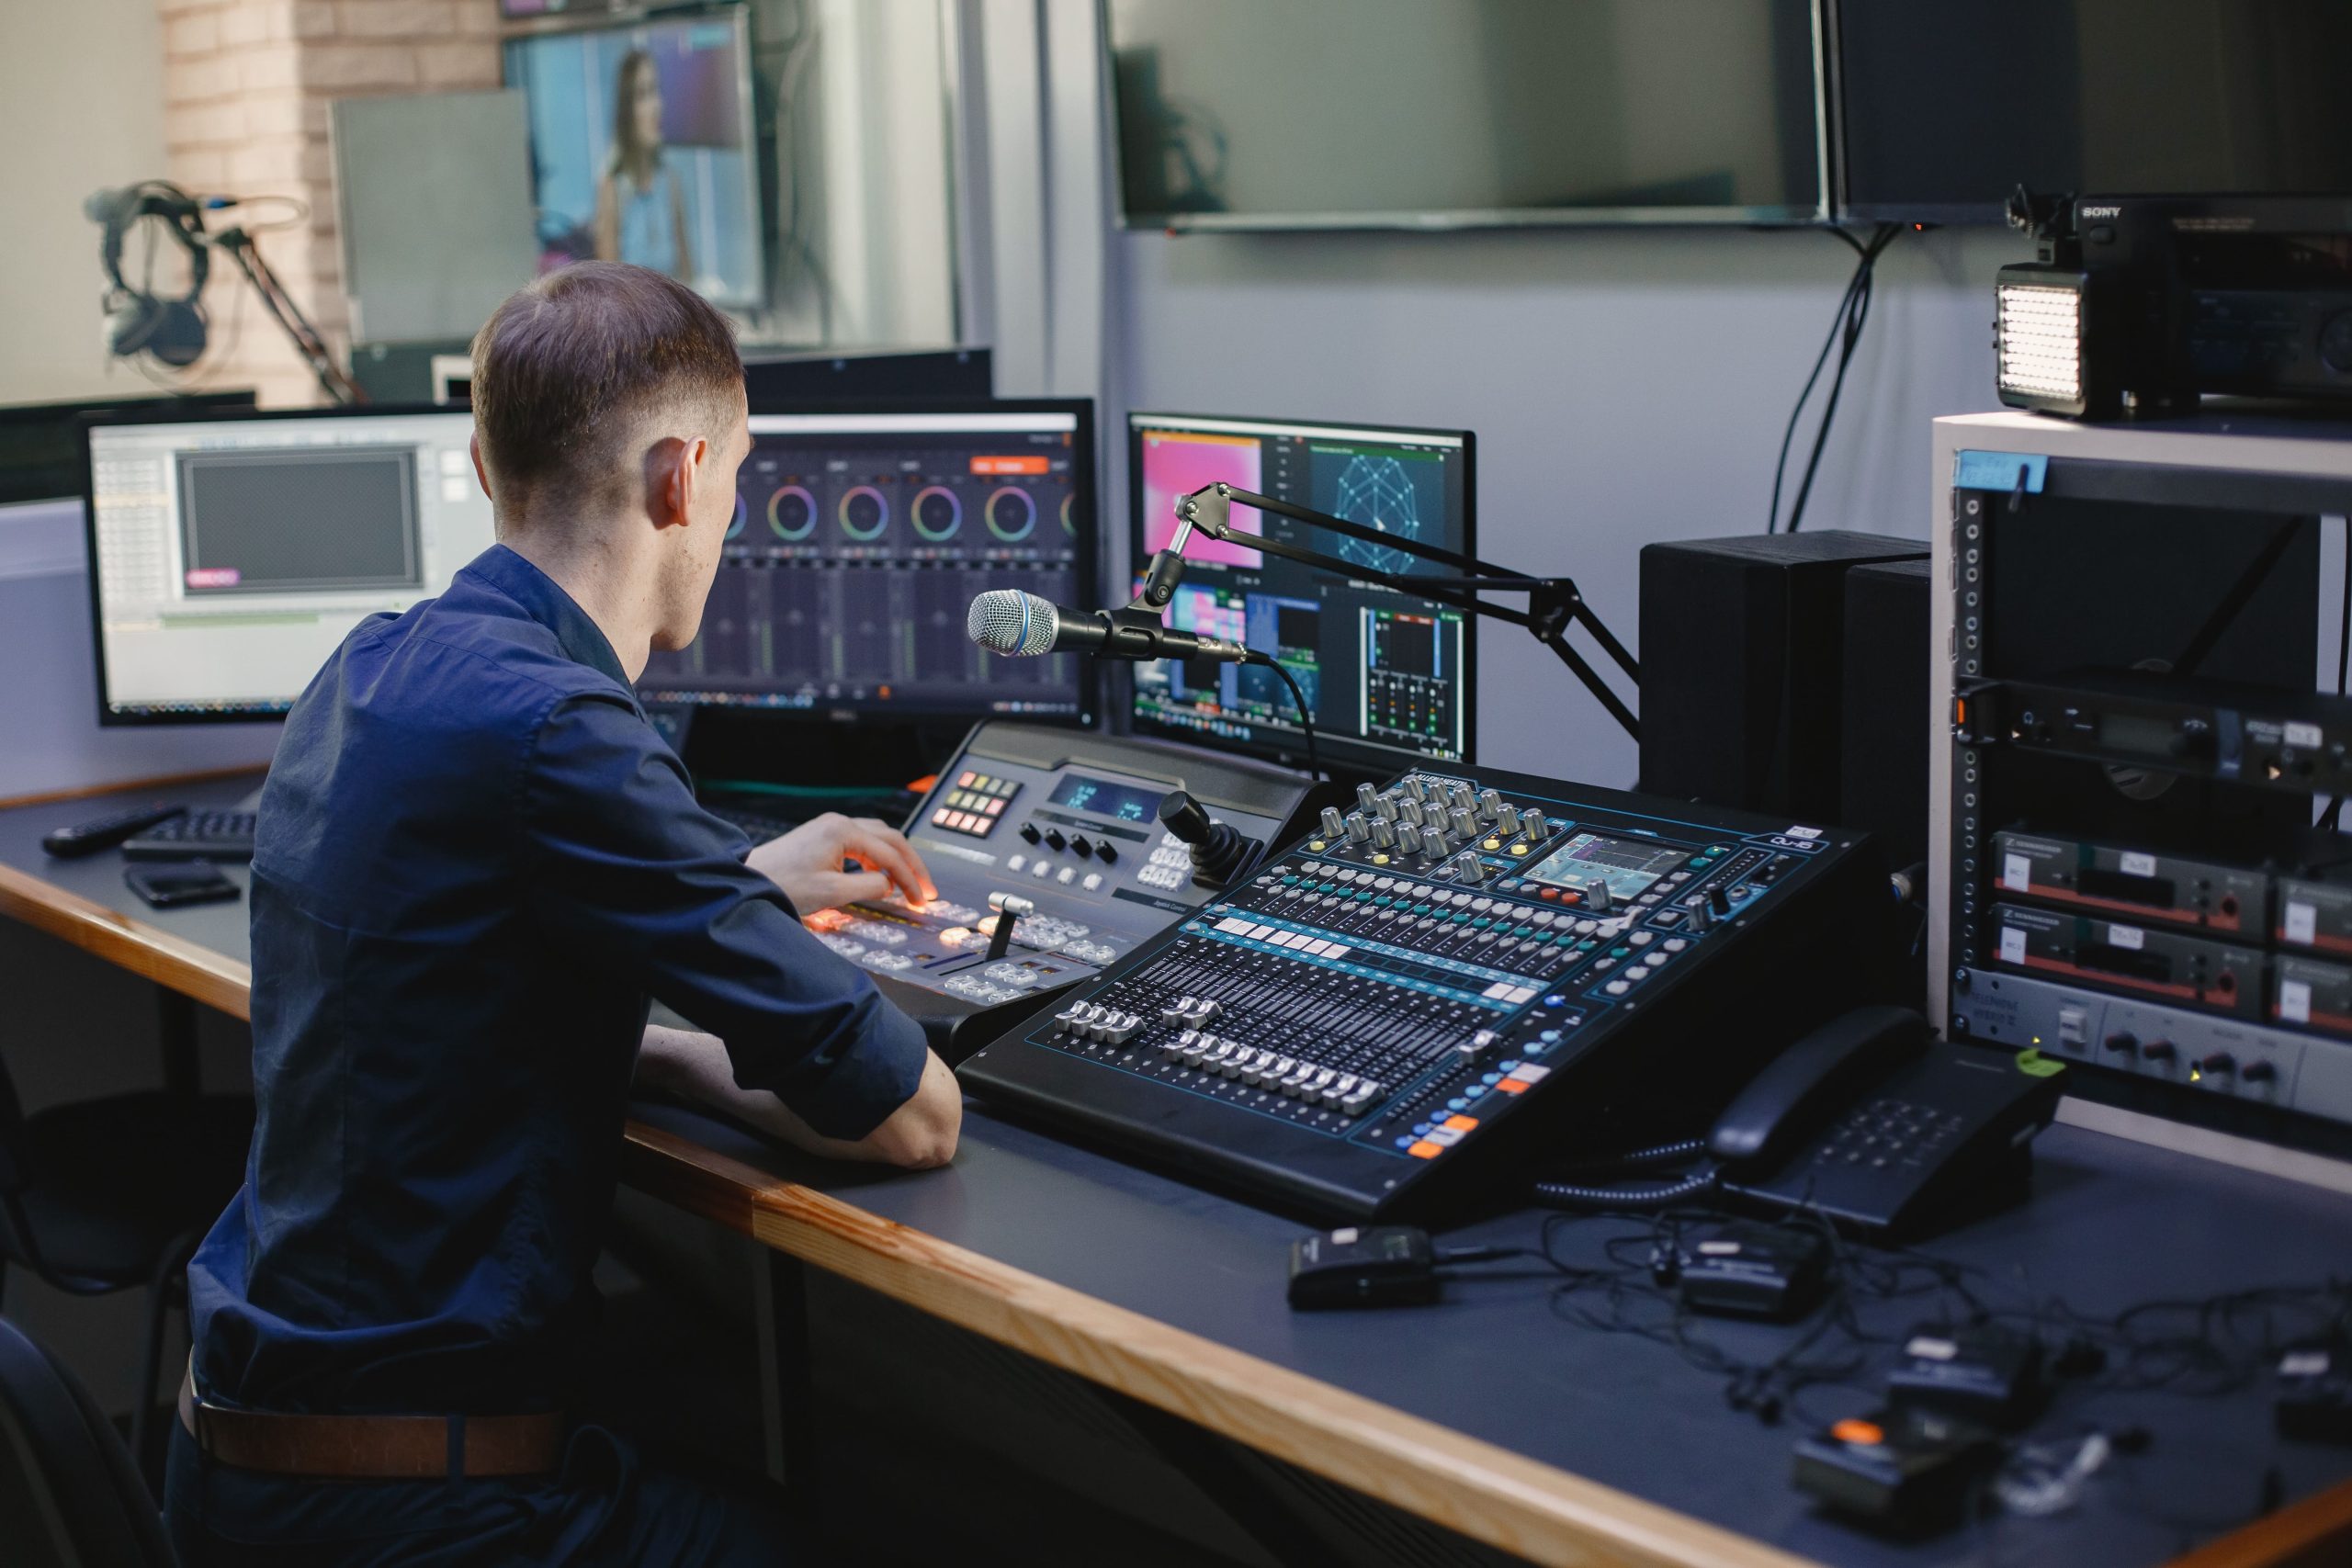 Discover the essential guide to selecting the perfect equipment for your audio visual productions. Megahertz Productions provides expert advice and insights to help you make informed decisions and elevate the quality of your AV projects.